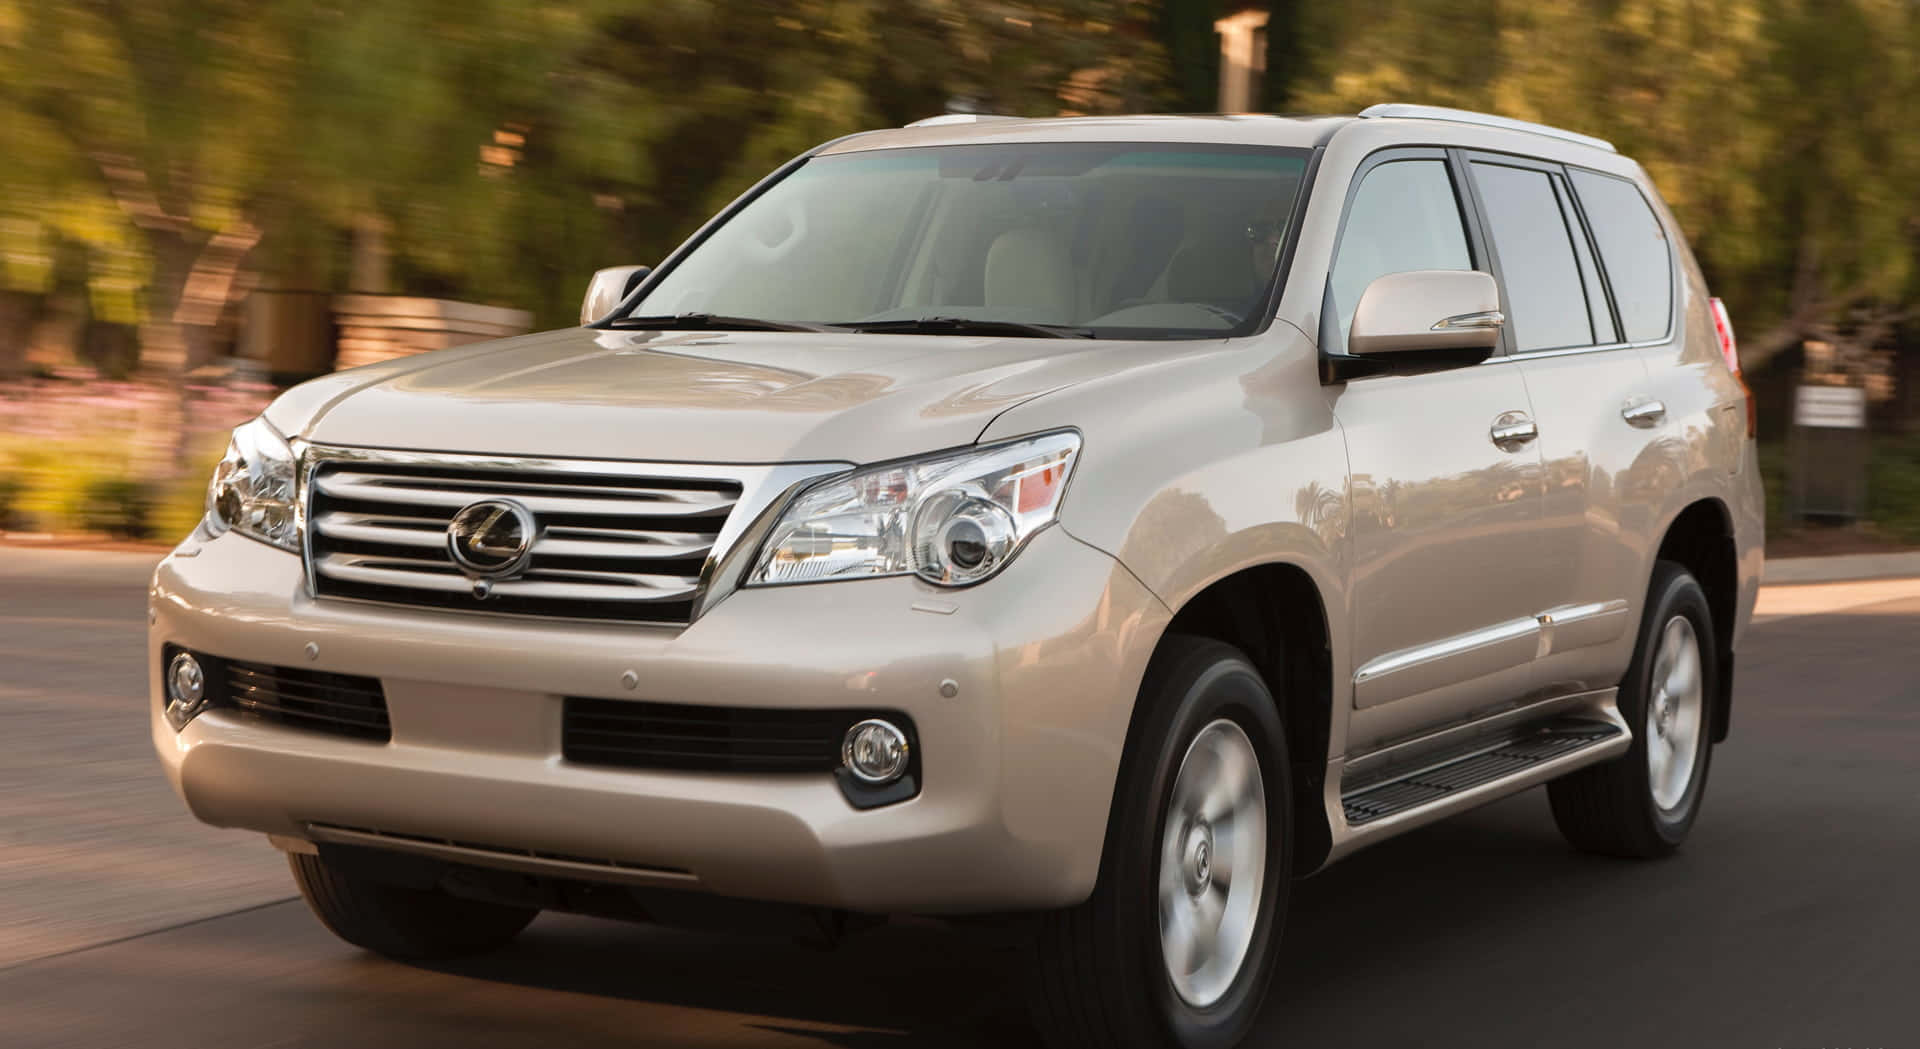 Experience Luxury with the Stunning Lexus GX 460 Wallpaper